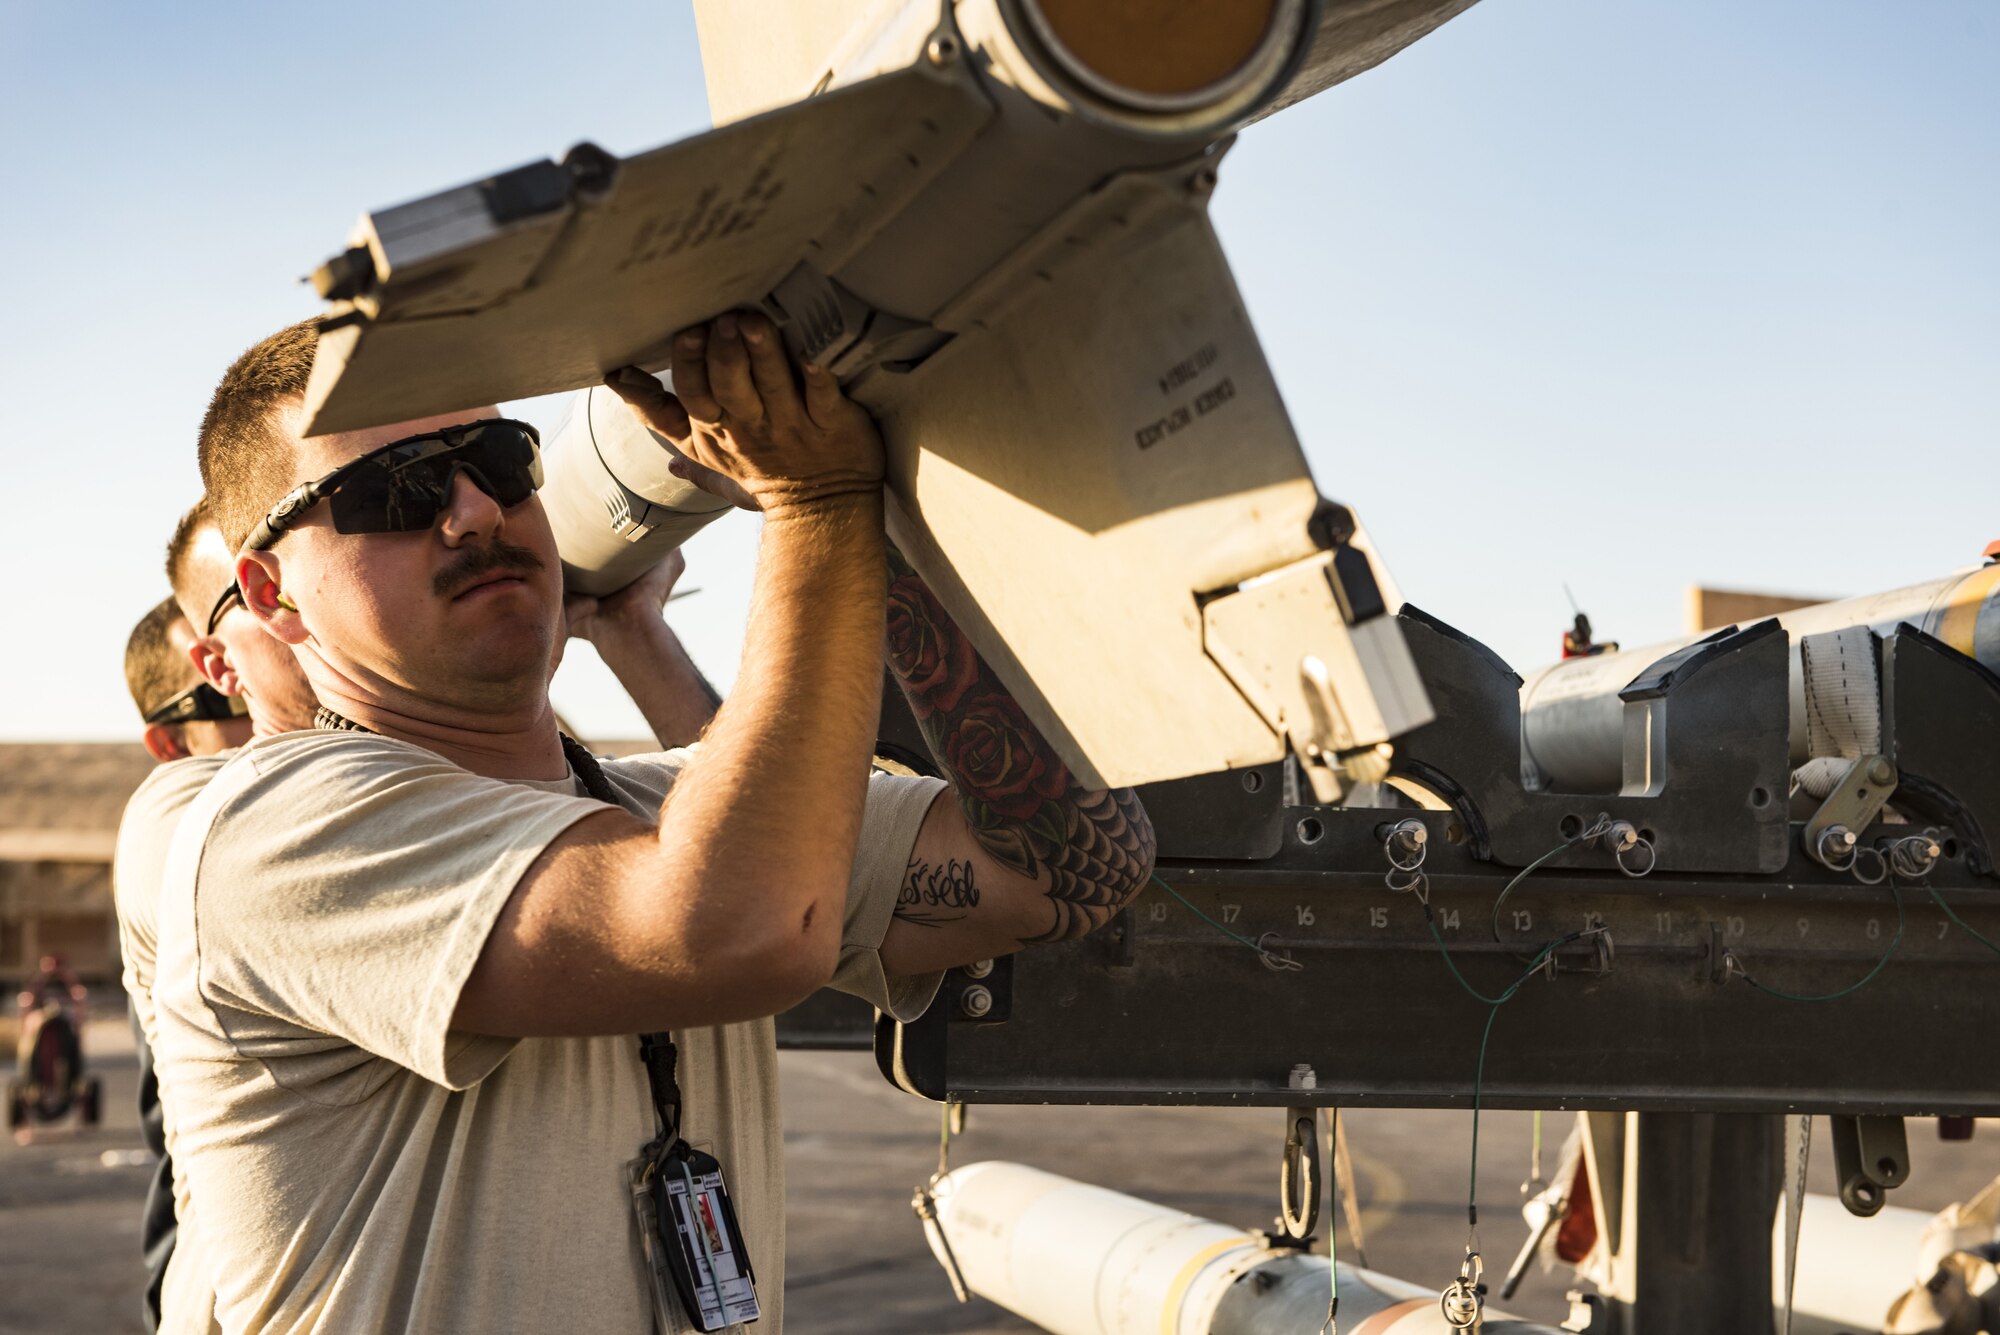 Airmen assigned to the 332d Expeditionary Maintenance Squadron work together to load munitions onto an F-15E Strike Eagle November 10, 2017 in Southwest Asia. The 332d Air Expeditionary Wing was recently awarded the 2017 Clements McMullen Memorial Daedalian Weapons System Maintenance Trophy for their crucial role in the largest air campaign in the history of Air Force Central Command. (U.S. Air Force photo by Staff Sgt. Joshua Kleinholz)